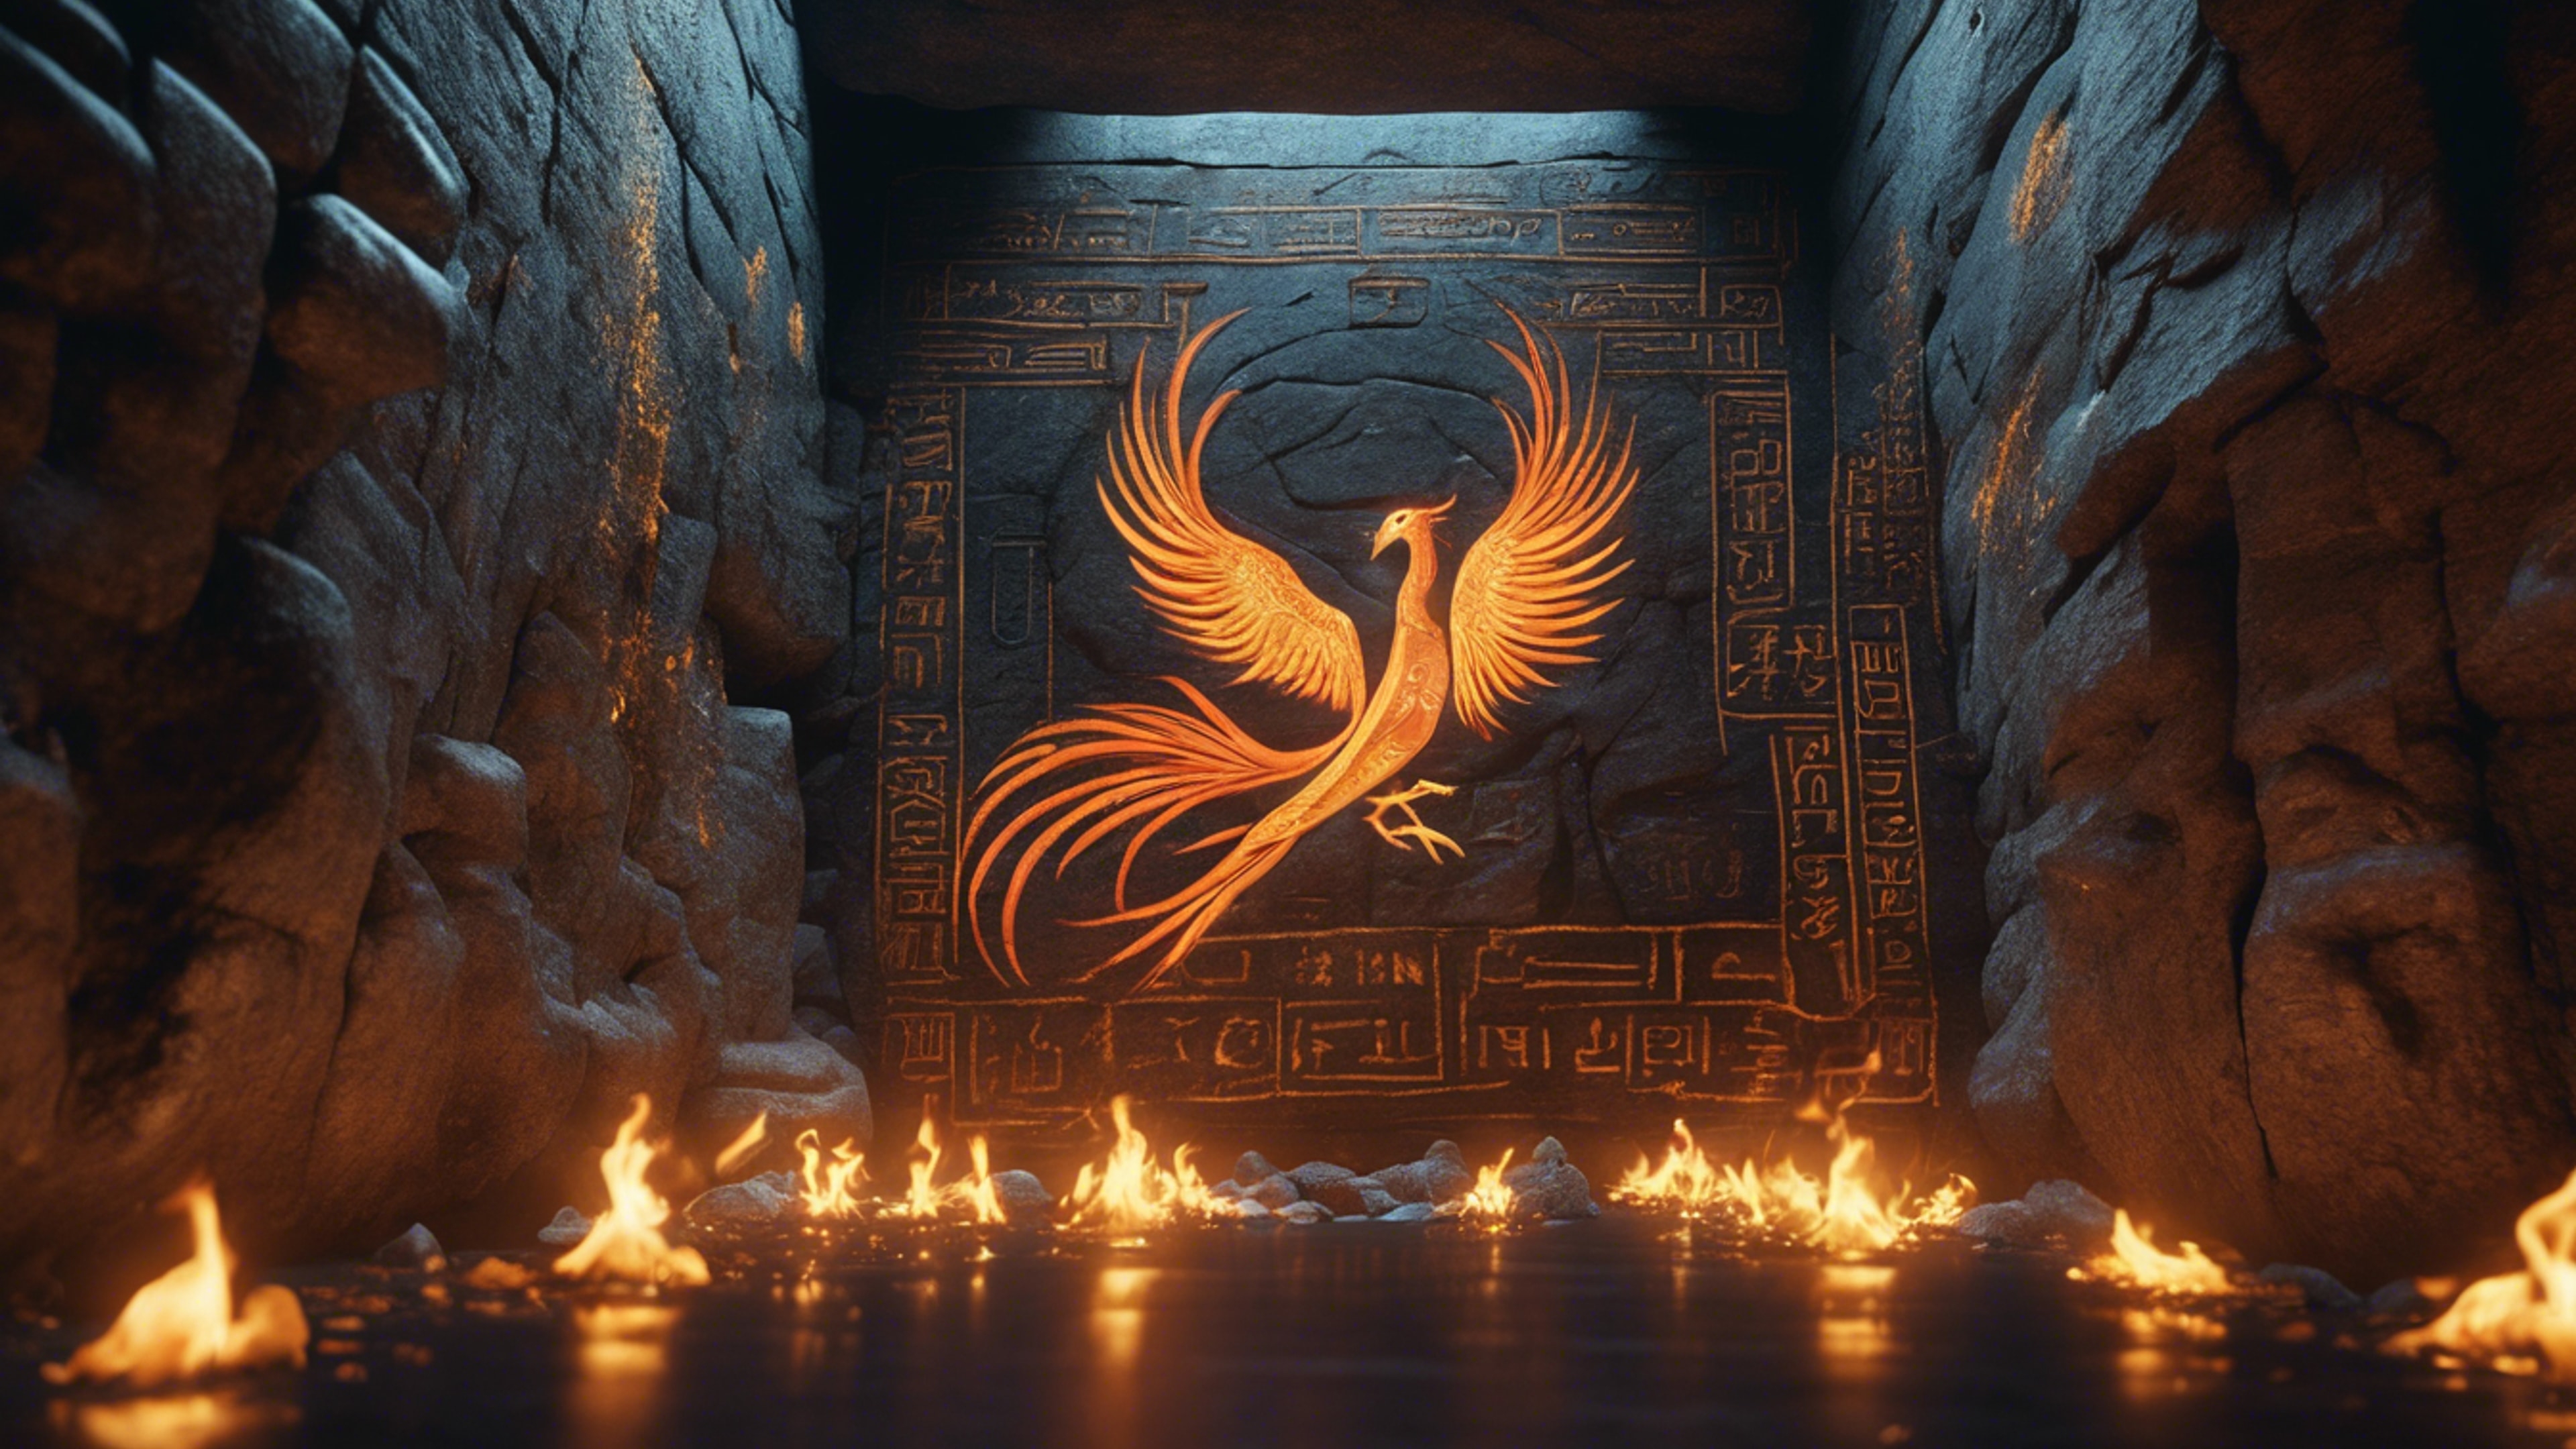 A phoenix breathing fire into a dark cave, illuminating ancient hieroglyphs etched onto the stone walls.壁紙[af70d24b9e8d4eafacdf]